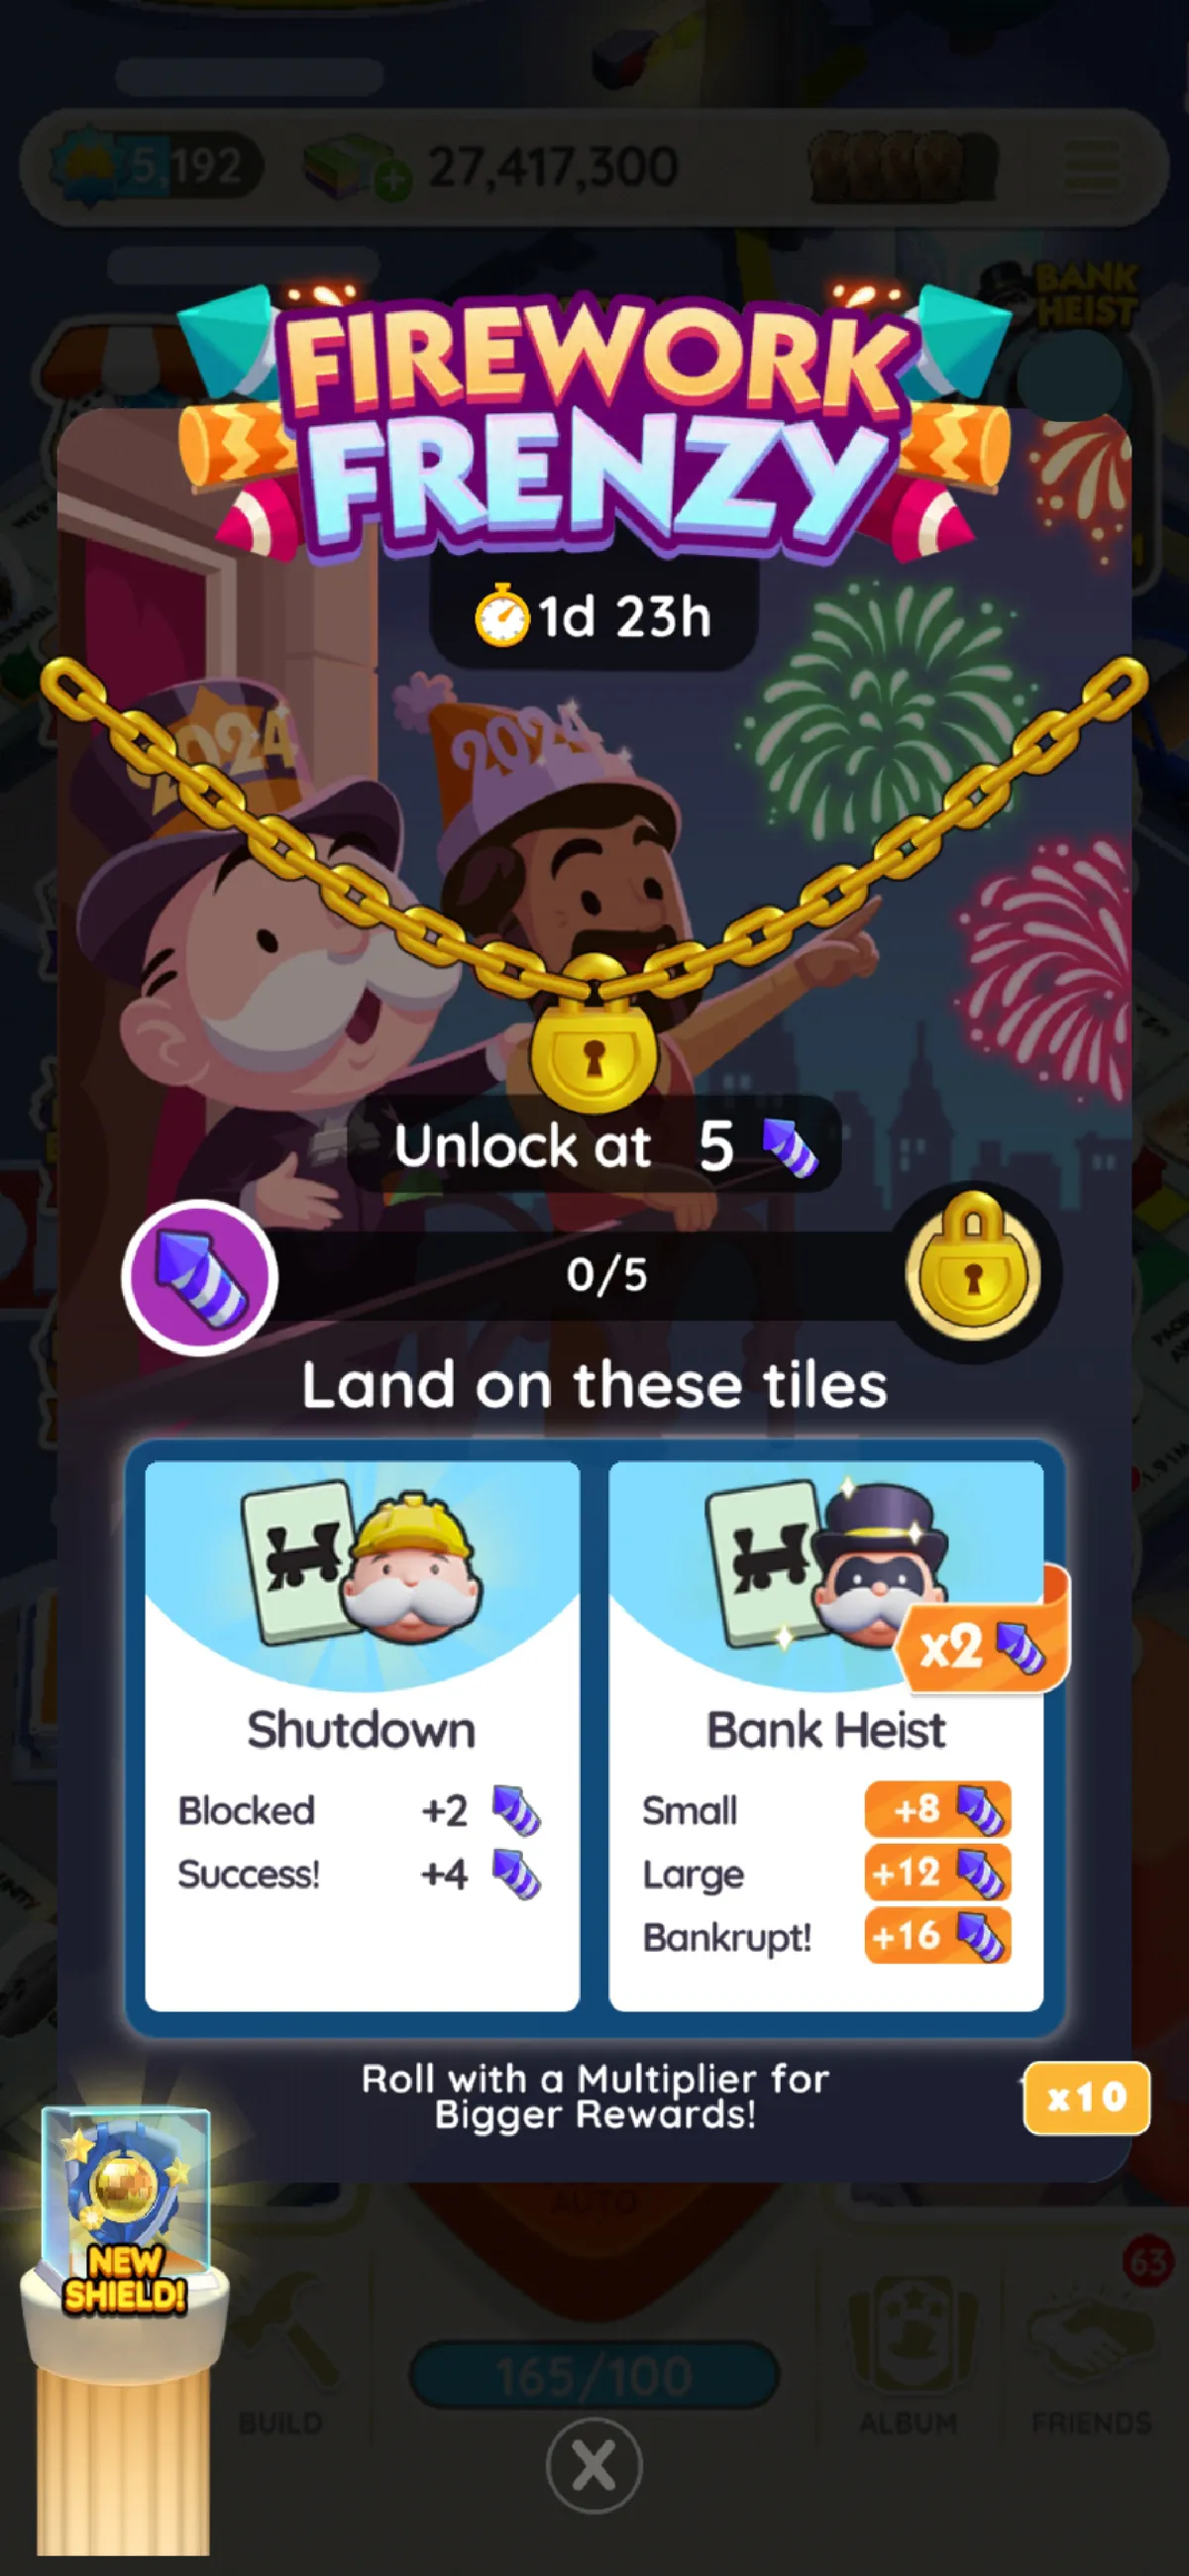 A header image for the Firework Frenzy tournament in Monopoly GO showing the logo for the event. The image is part of an article listing the rewards and milestones for the Firework Frenzy tournament in Monopoly GO.